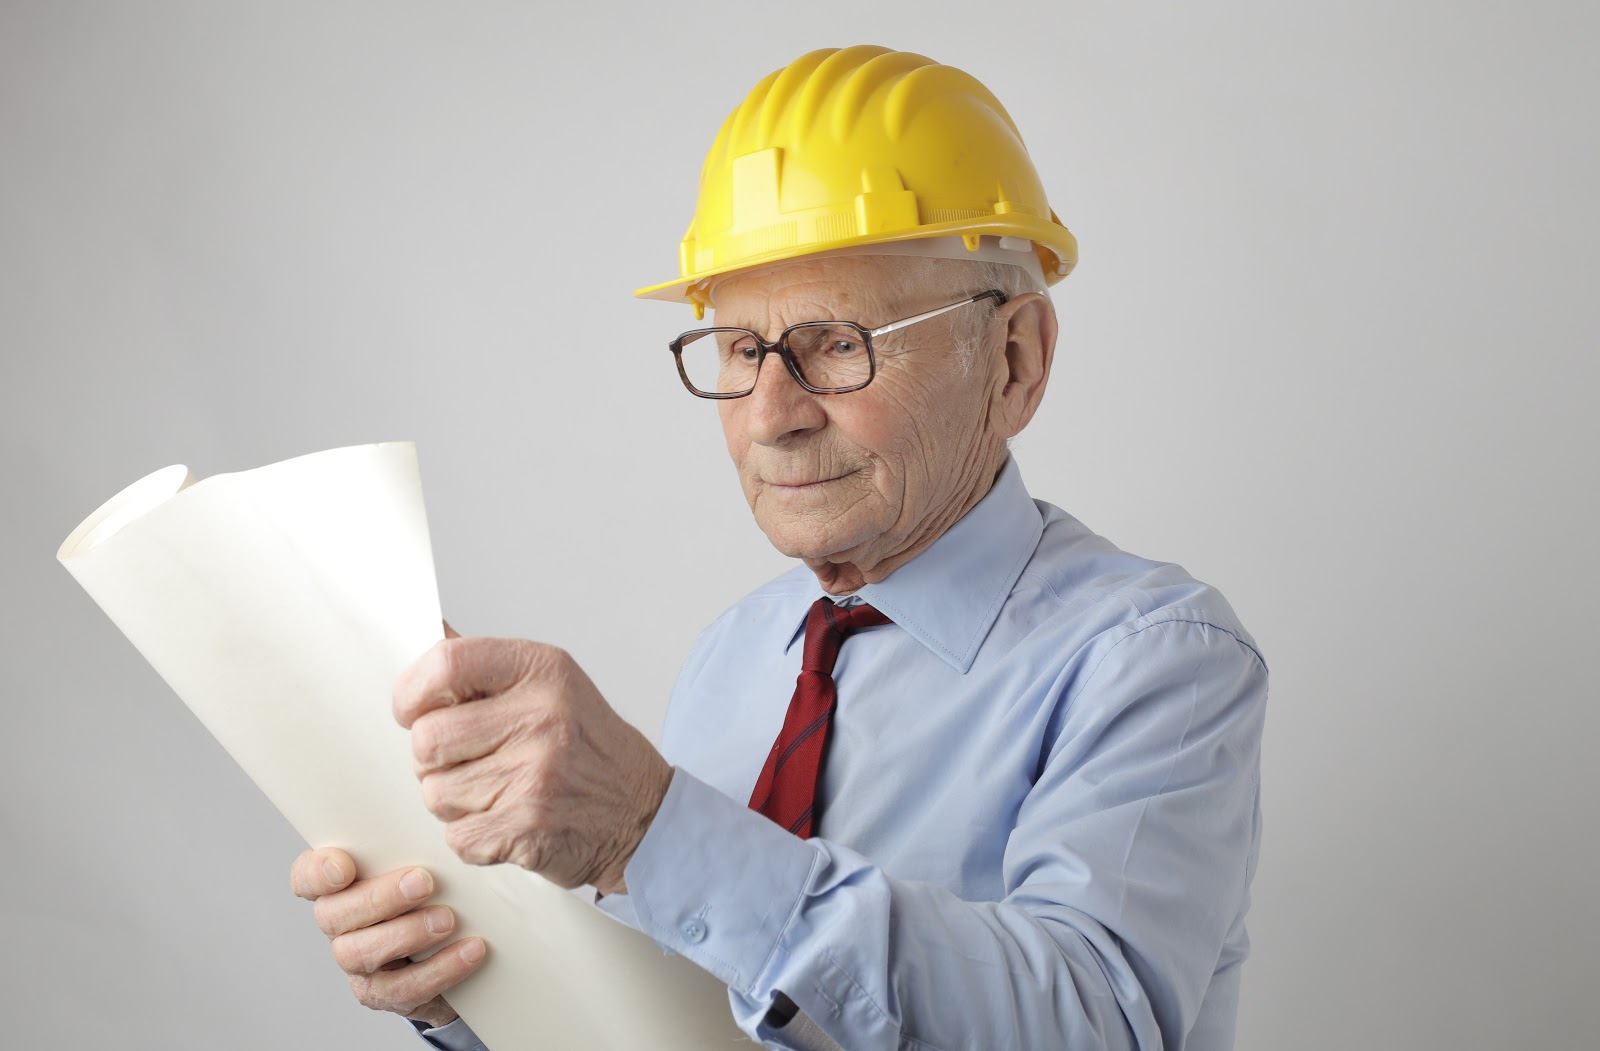 Conducting a Senior Home Safety Assessment